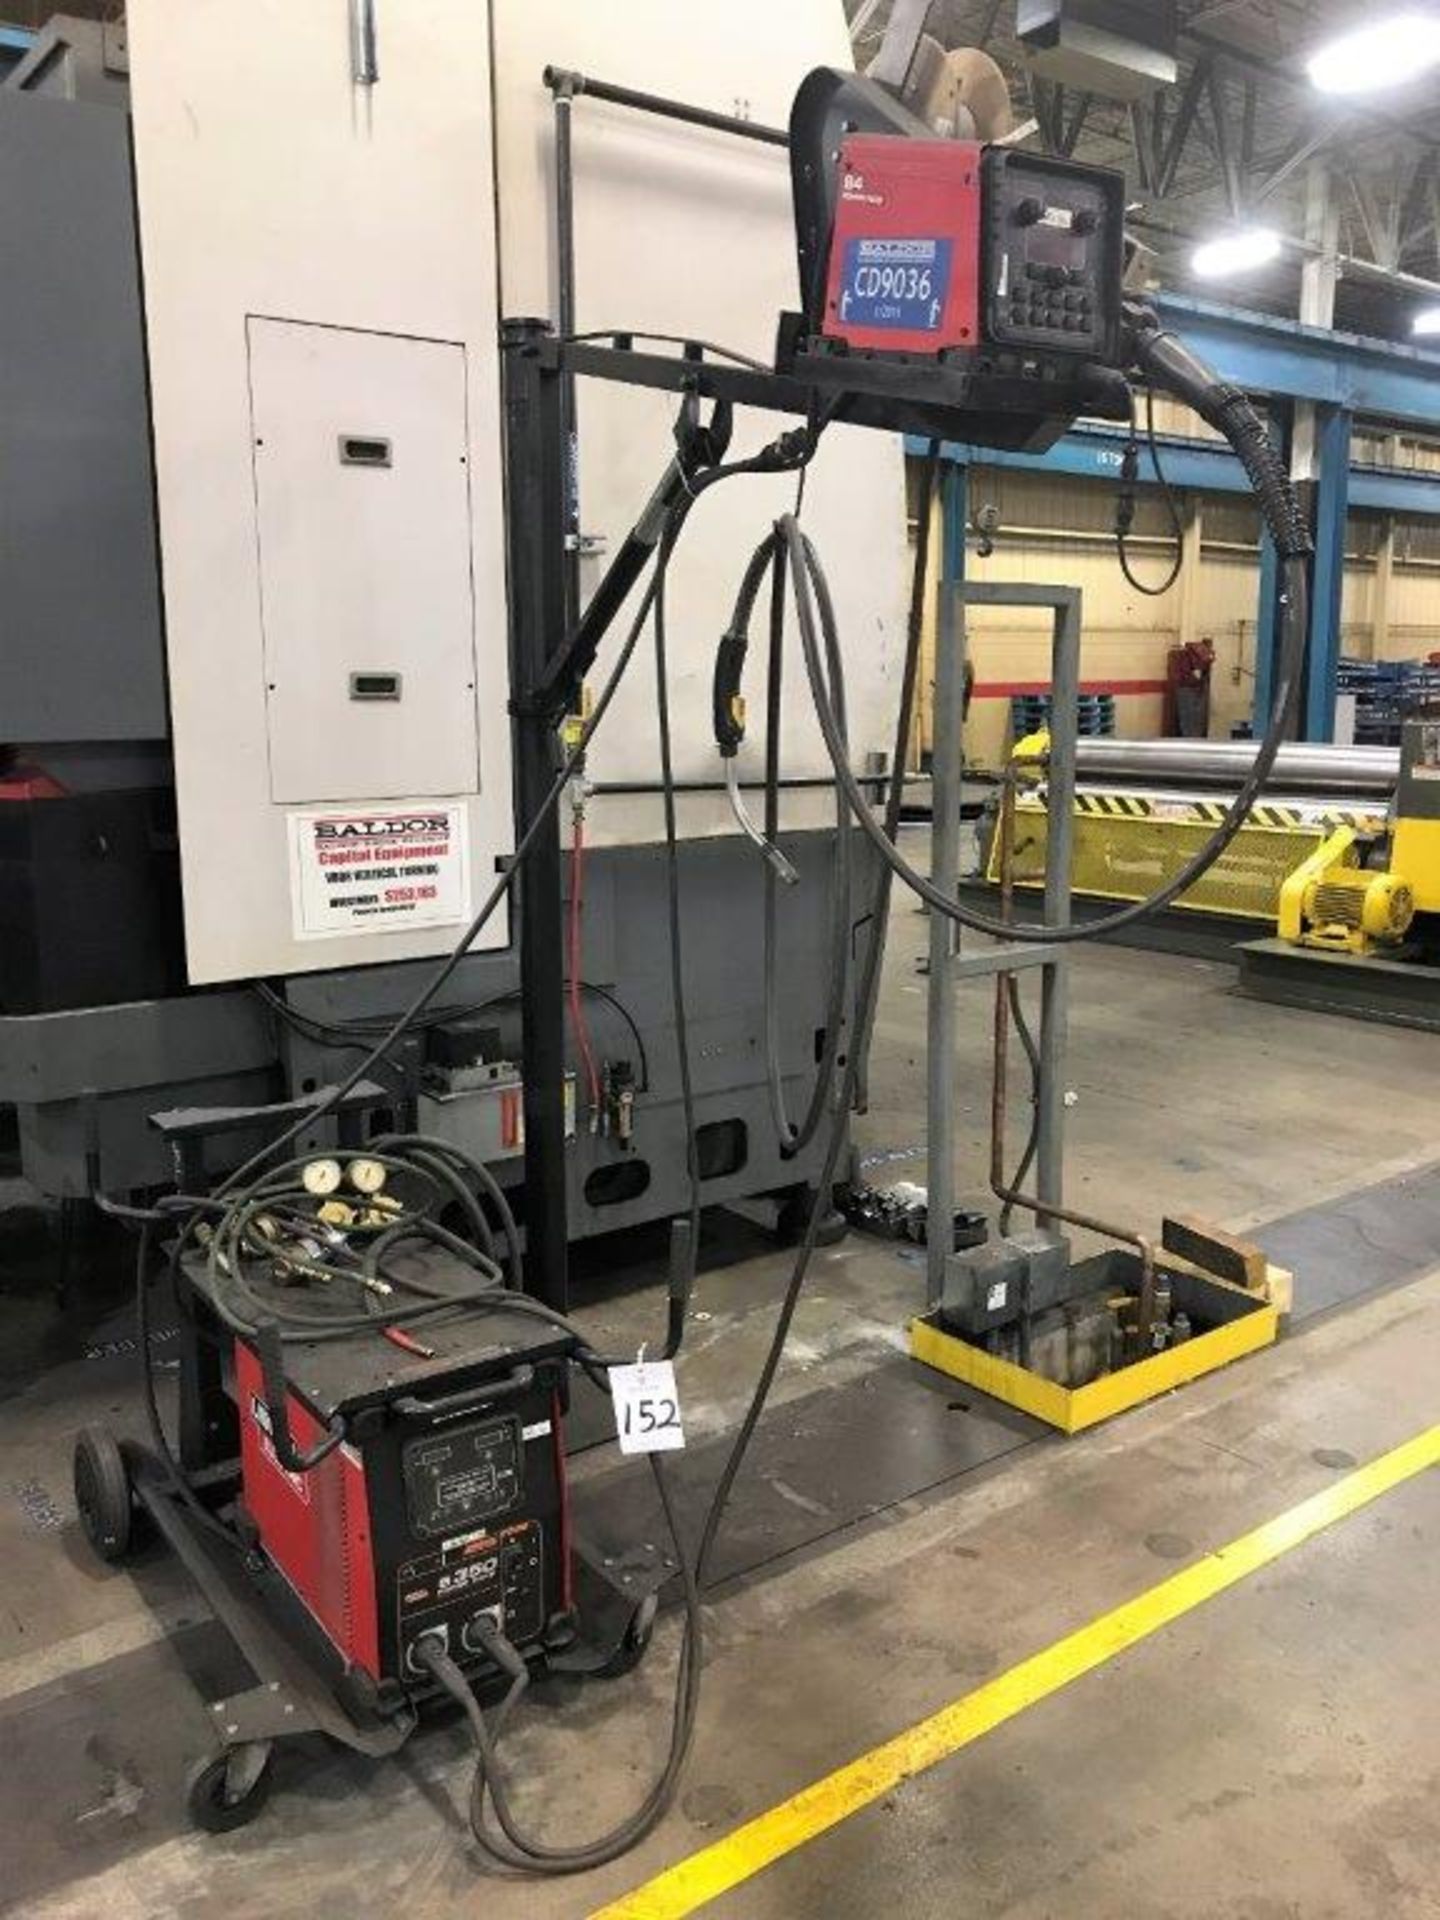 Lincoln Powerwave S350, 350 amp Advanced Multi Process Welder S/N: U1141010122, with Power Feed 84